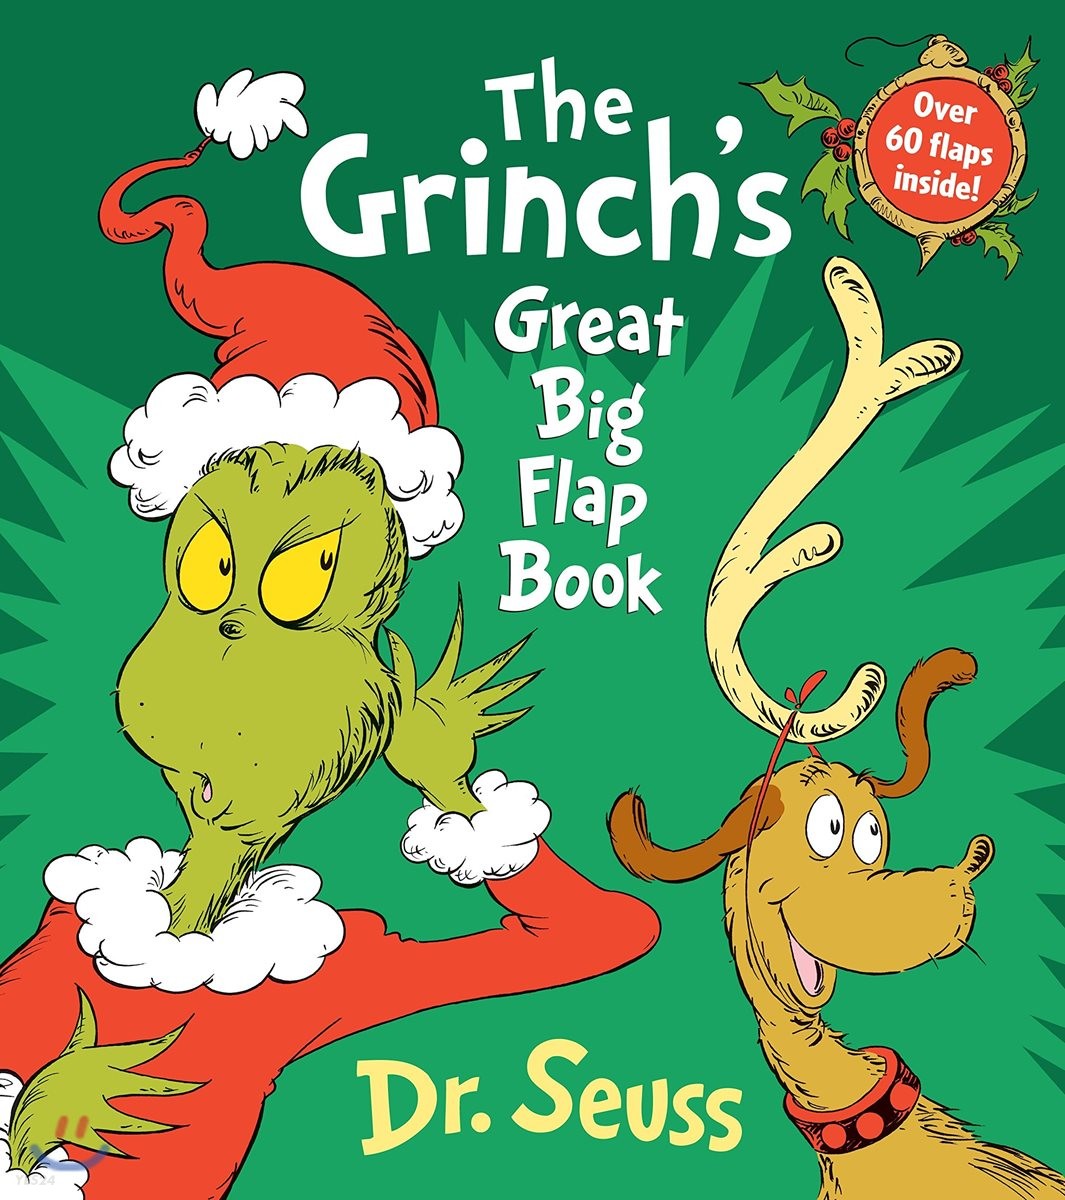 (The)Grinchs great big flap book